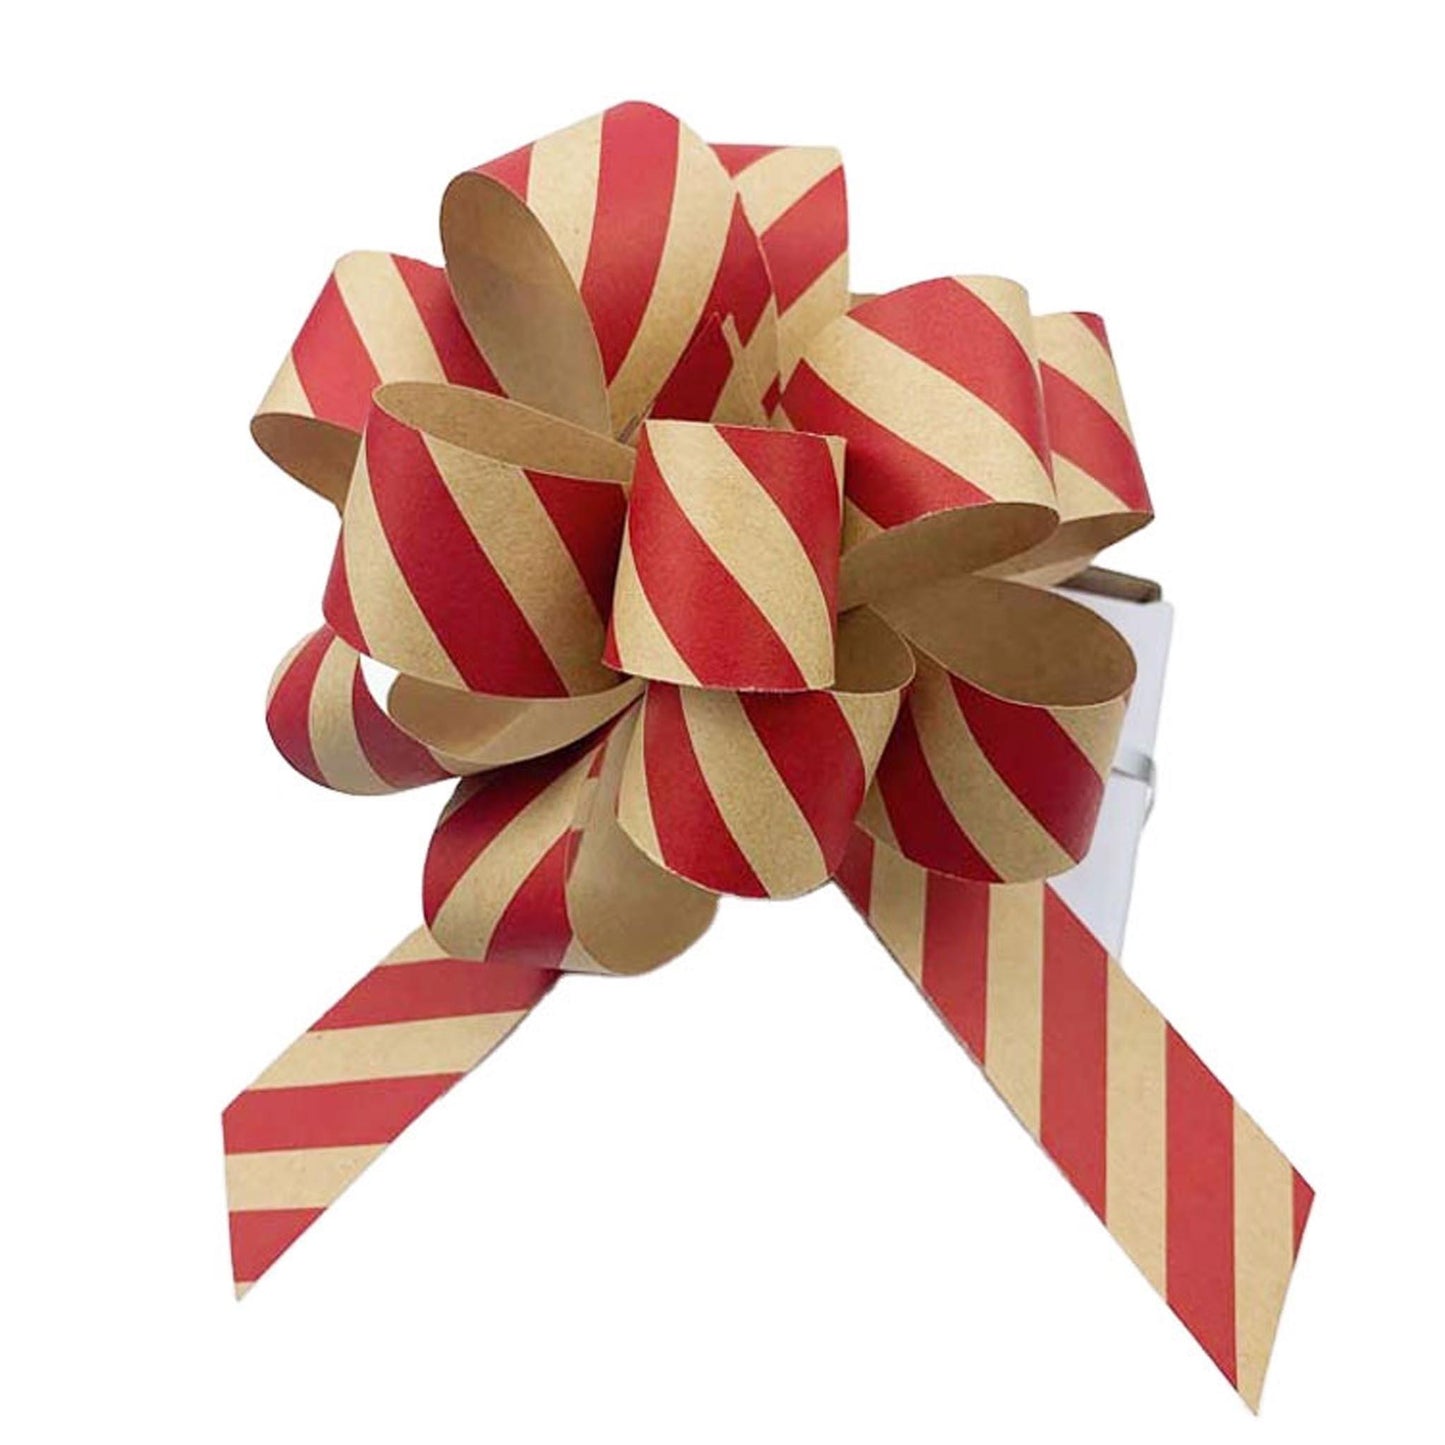 Multicolor Paper Environment Protection Gift Wrapping Pull Bow Ribbon